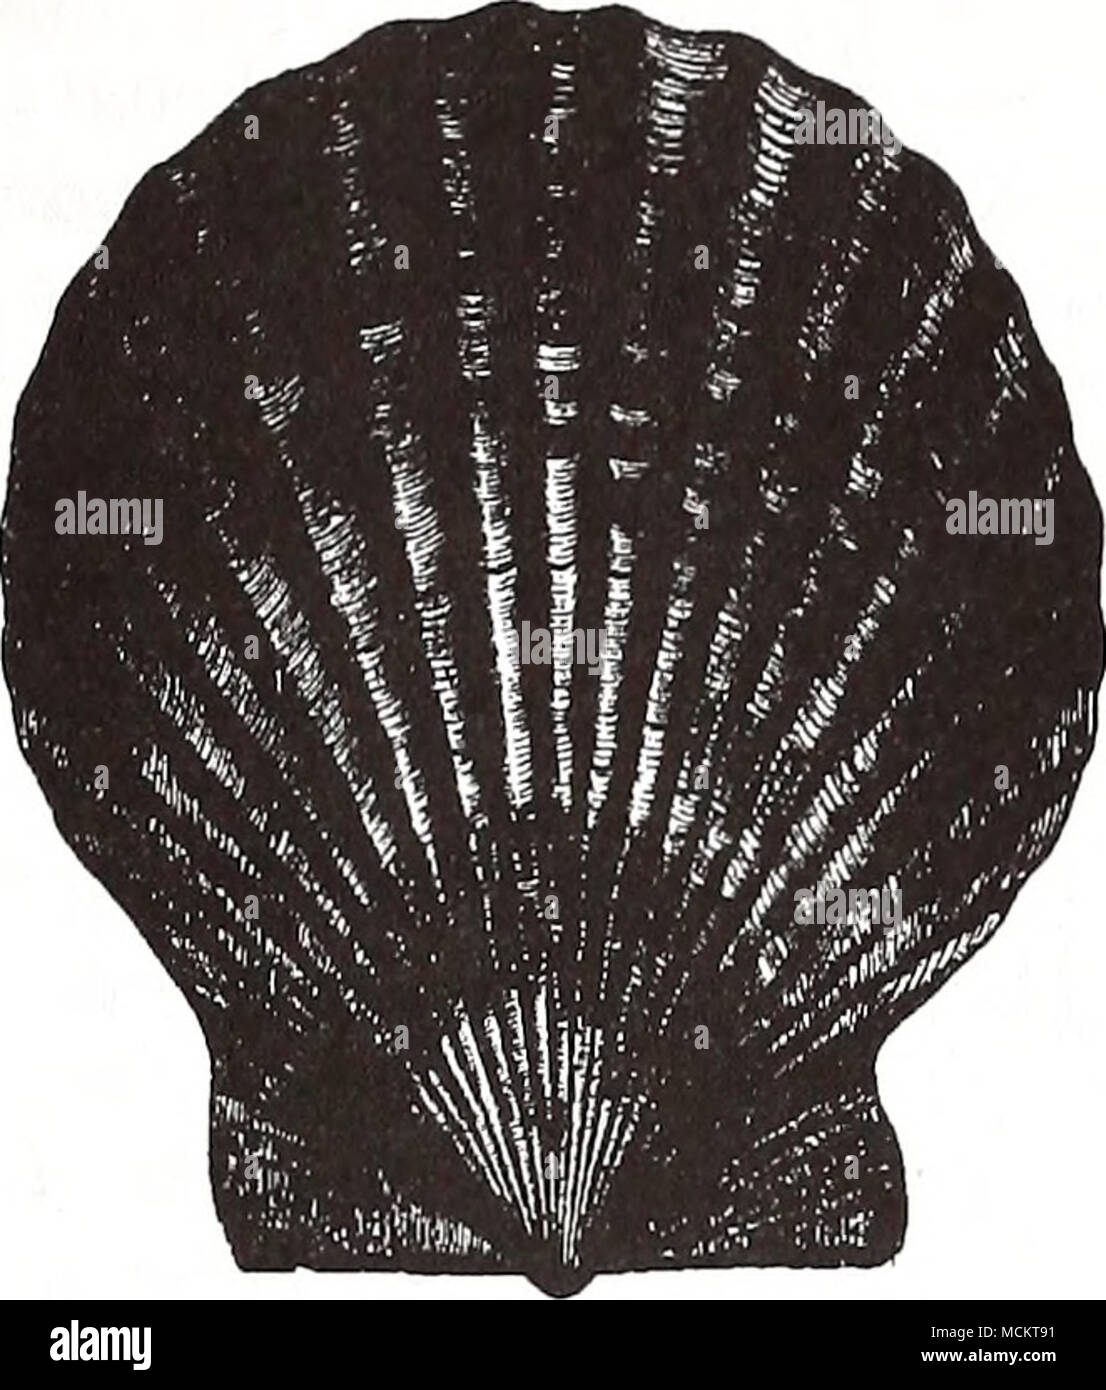 . 2 cm (from Goode 1884) Common Name: bay scallop Scientific Name: Argopecten irradians Other Common Names: Atlantic bay scallop, peigne bale de I'Atlantique (French), peine caletero atlantico (Spanish) (Fischer 1978). Classification (Turgeon et al. 1988) Phylum: Mollusca Class: Bivalvia Order: Ostreoida Family: Pectinidae Value Commercial: Bay scallops are harvested commer- cially by dredging, dip netting, raking, and hand picking (Peters 1978). Reported U.S. 1992 bay scallop land- ings were161.5 metric tons (mt), with a dollar value of $2.1 million (NMFS1993). This an important commer- cial  Stock Photo